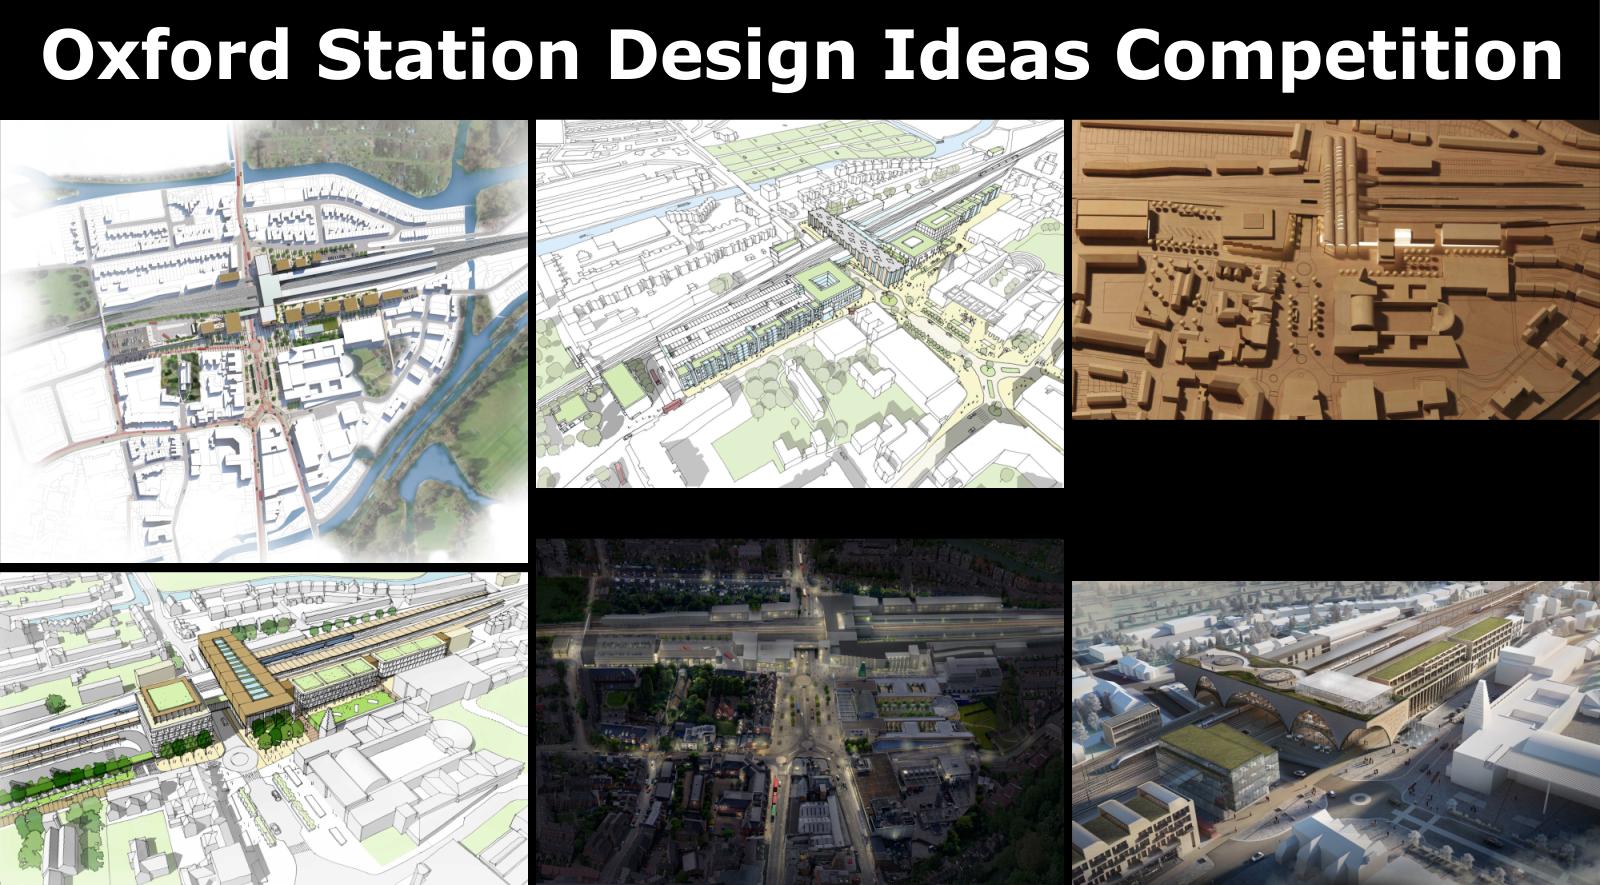 Oxford Station Design Ideas Competition